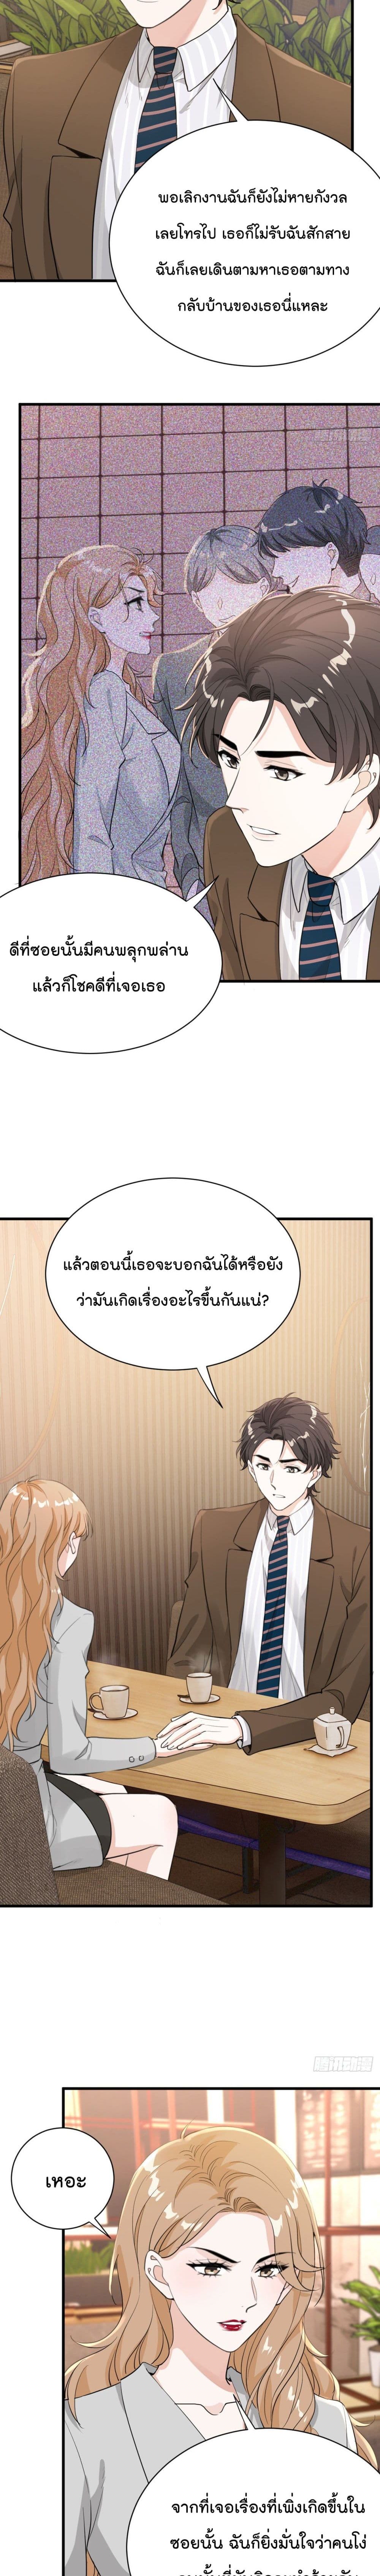 The Faded Memory - หน้า 6